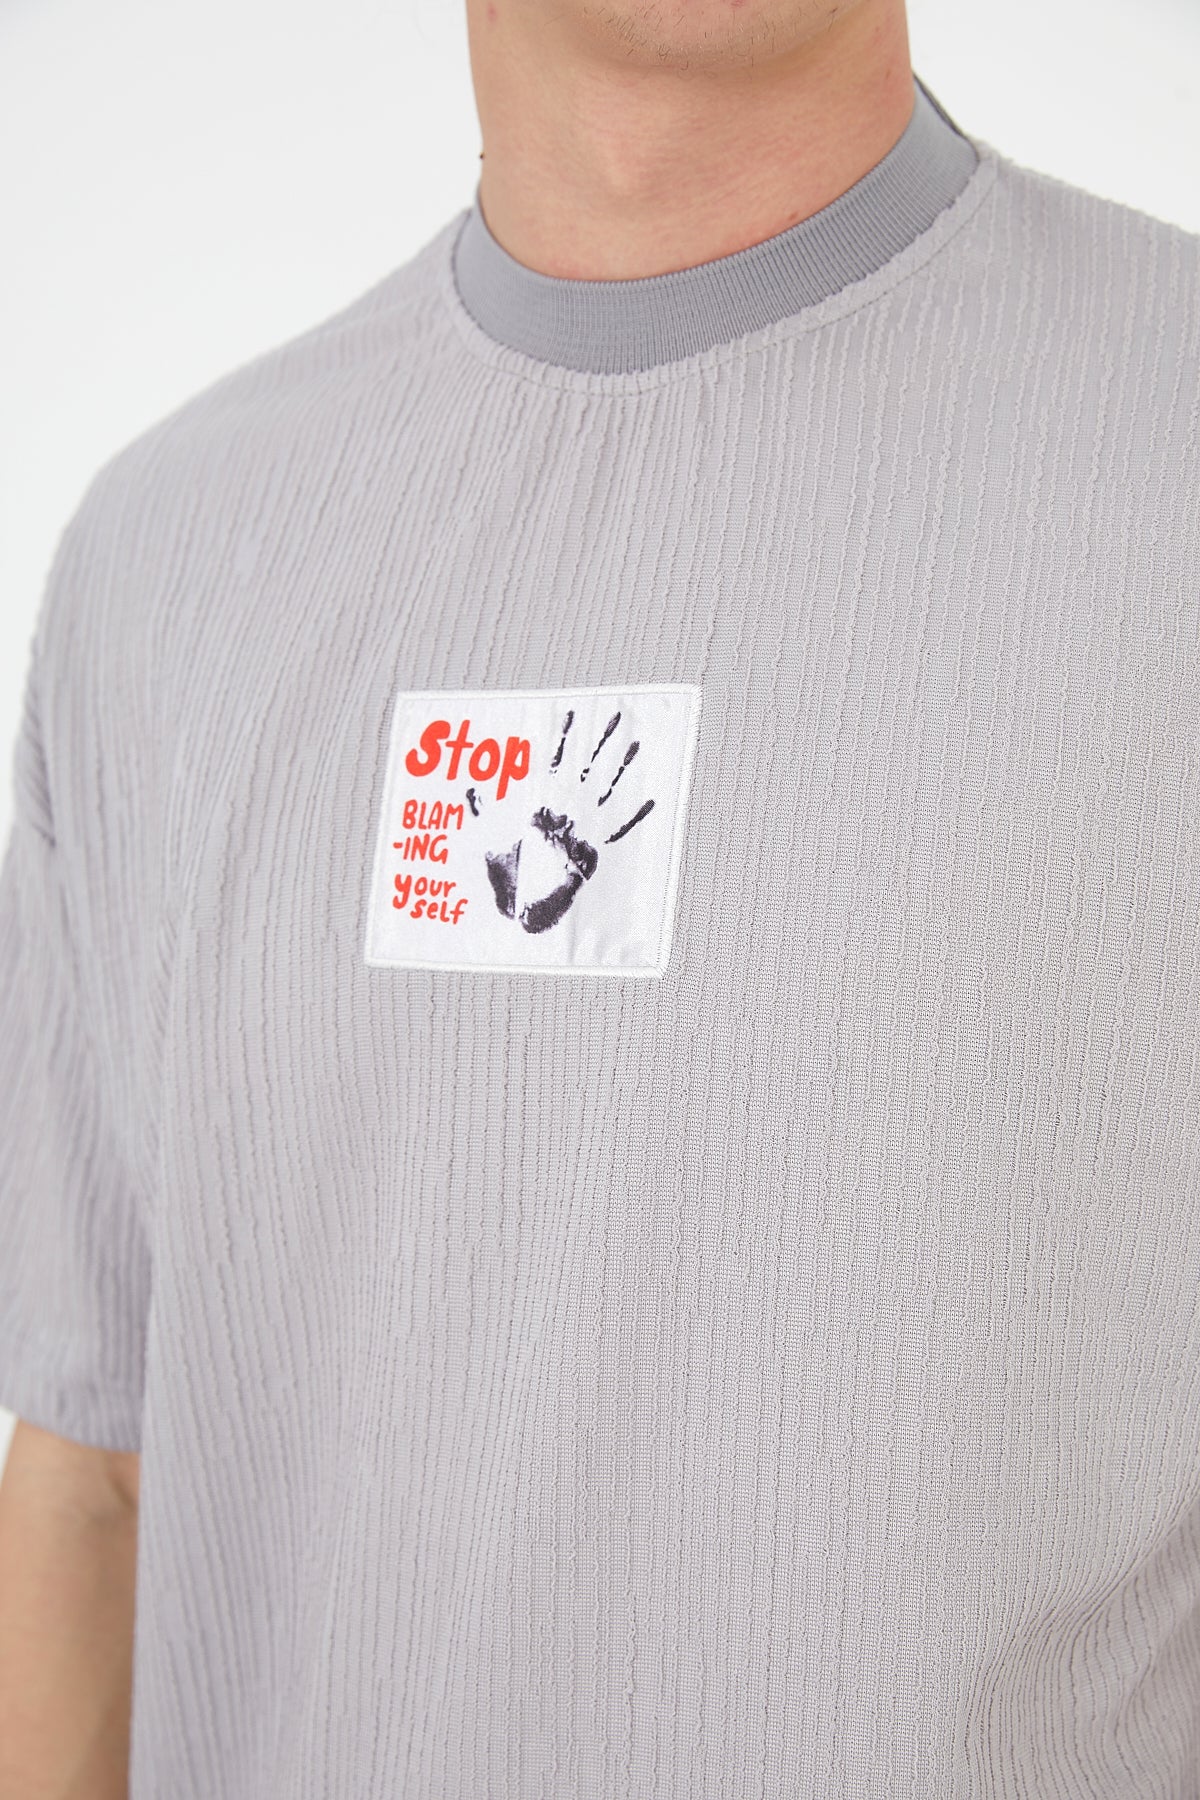 T-SHIRT - STOP STOPPING YOURSELF - GREY - DYS-Amsterdam